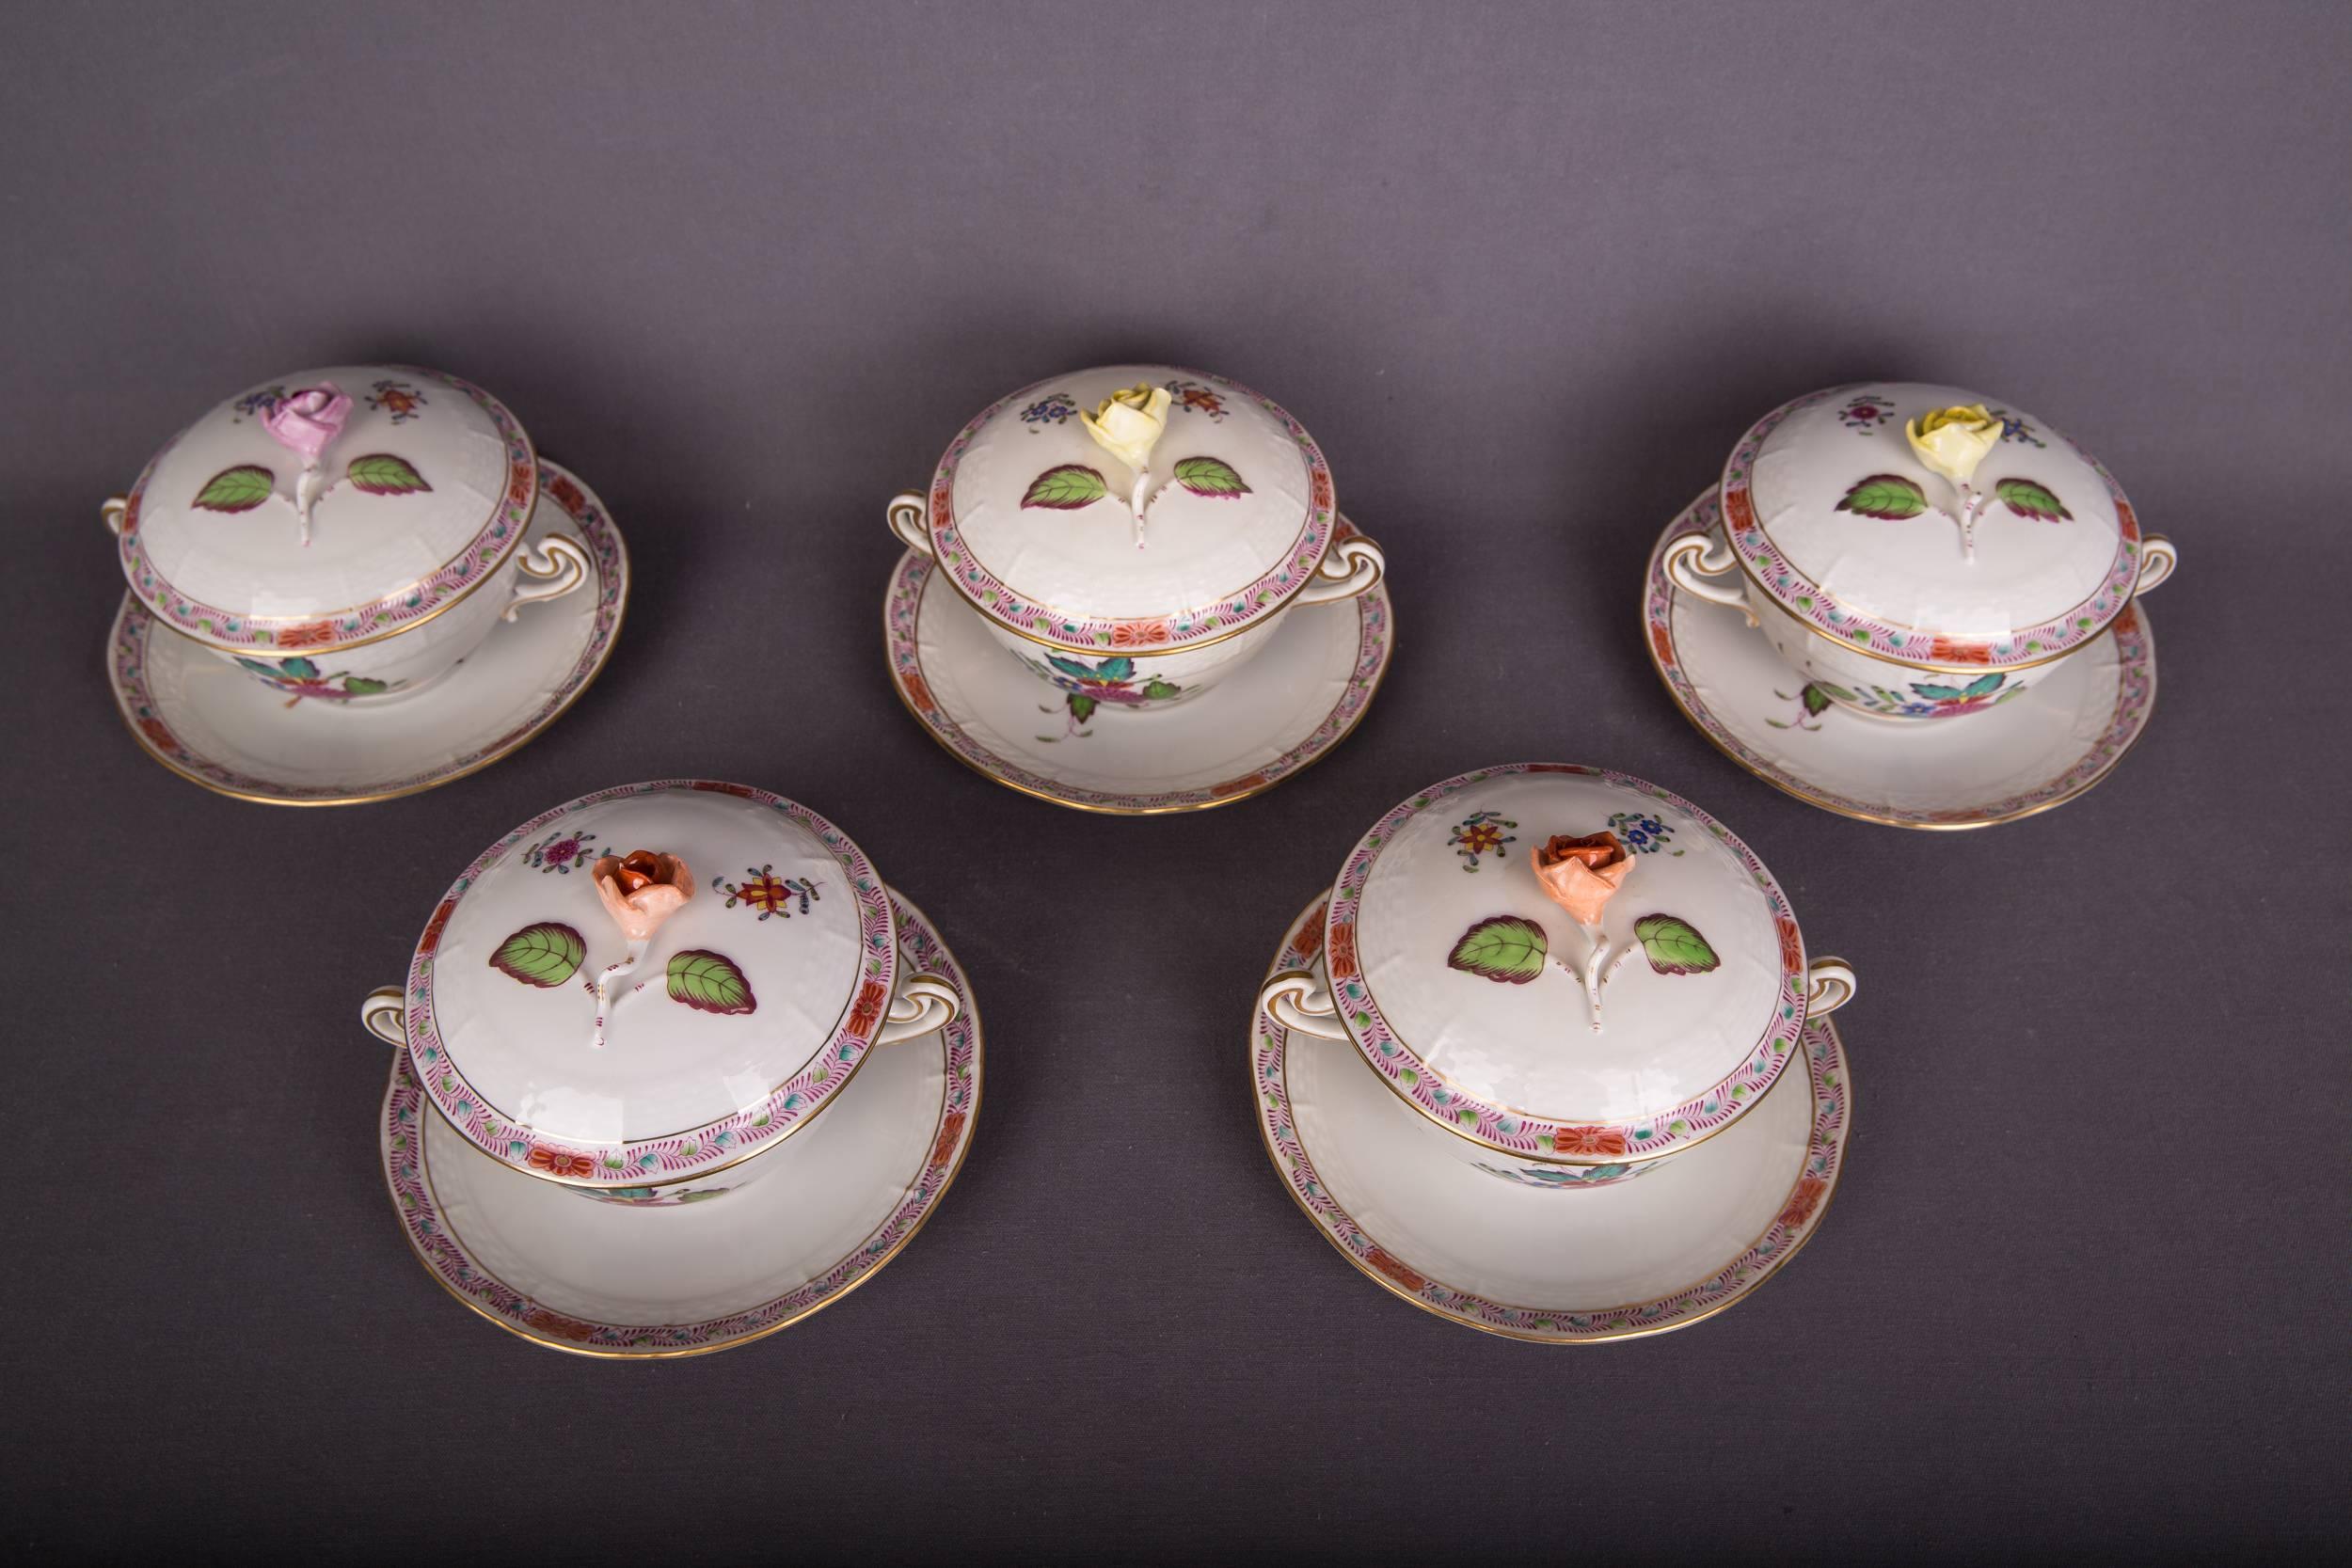 German Extensive Rare Herend Dining Service Porcelain with a Lot of Flowers and Gold